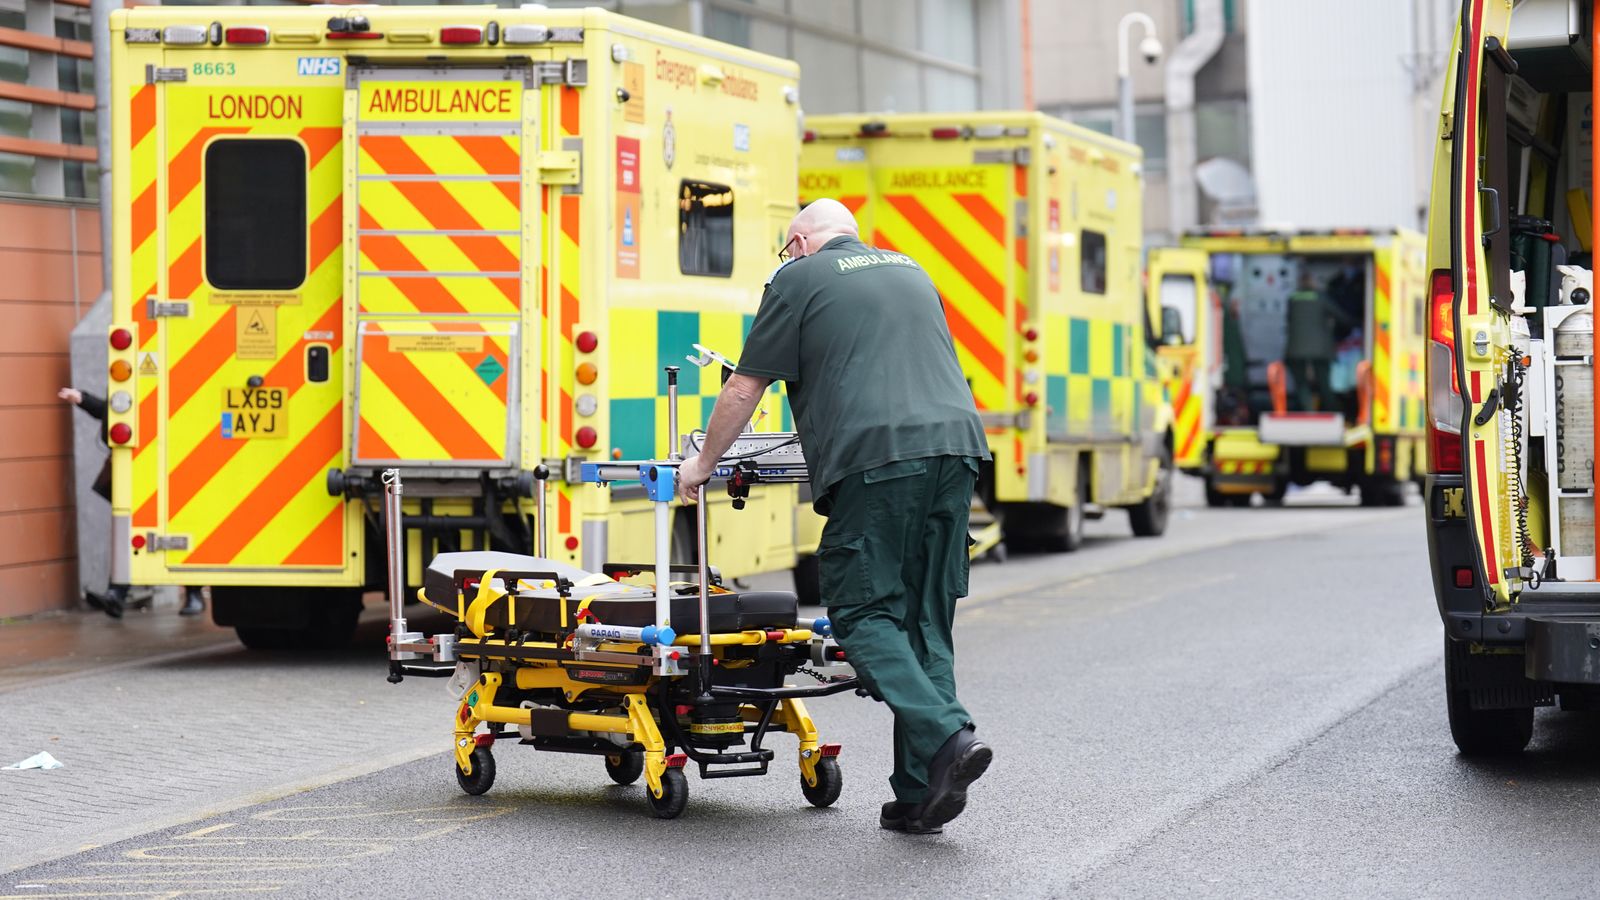 Thousands more hospital beds and 800 new ambulances promised amid plan to 'fix' emergency care